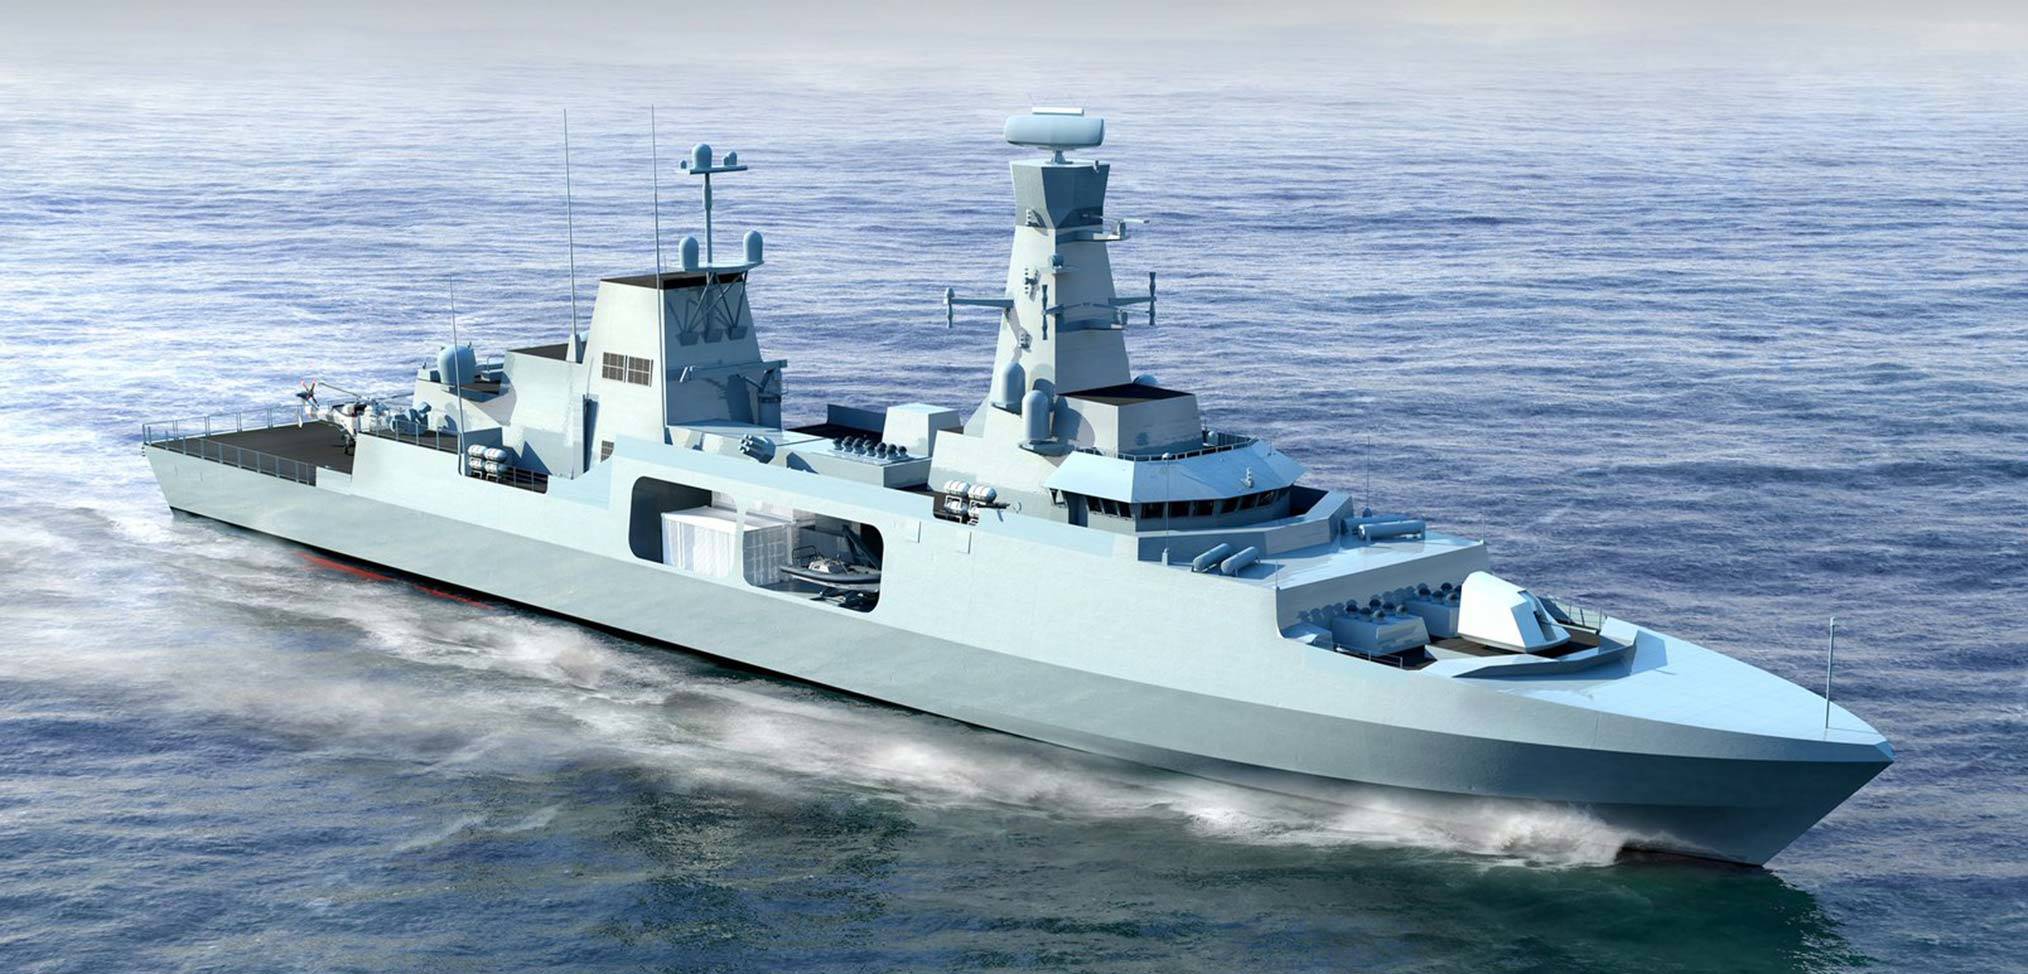 BAE Systems issues updated imagery of Leander Type 31e Frigate concept